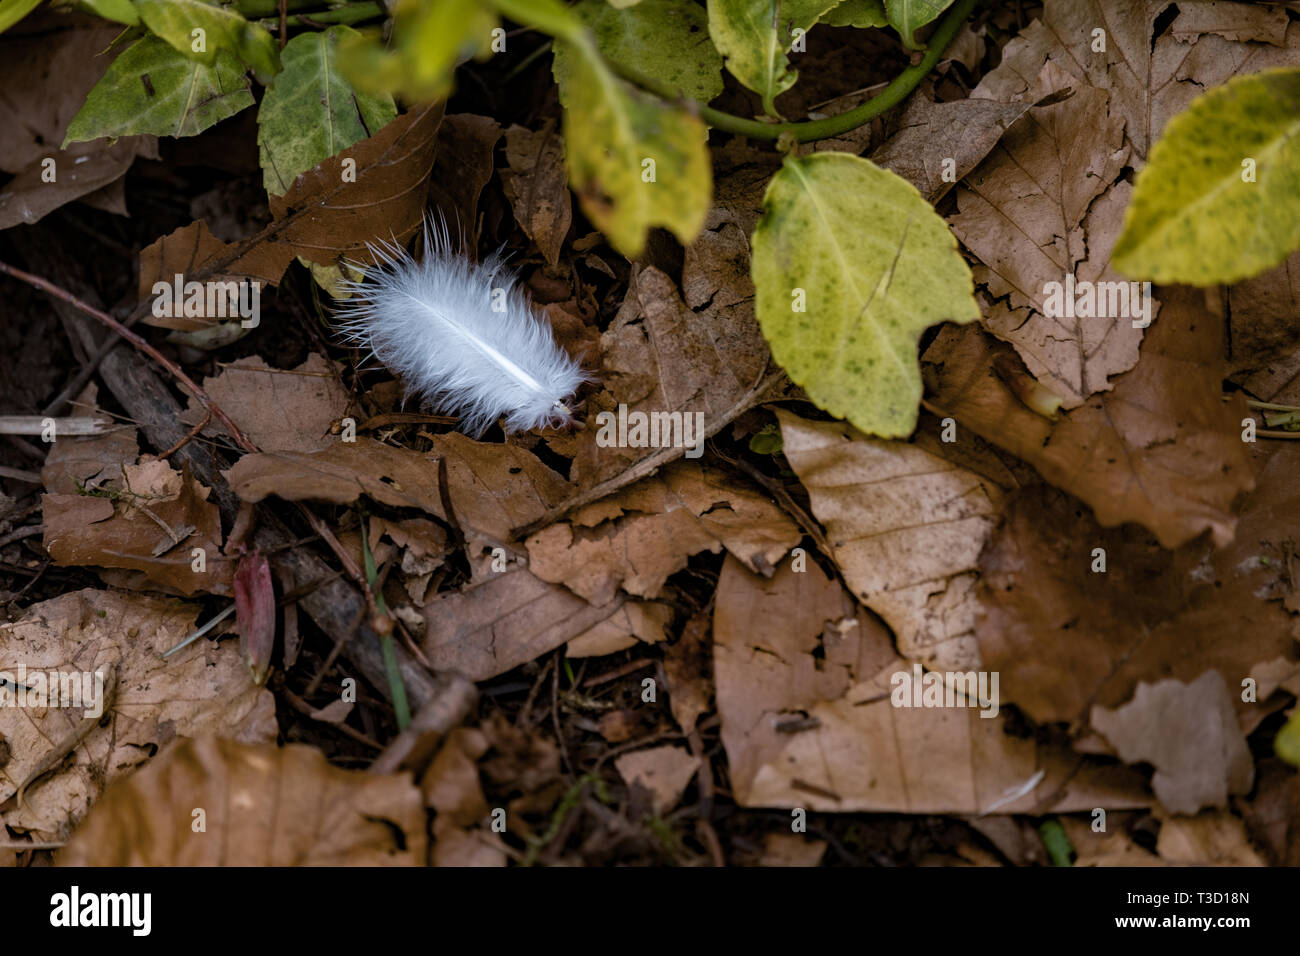 Beautiful white fluffy feather lying on brown leaves on the ground. Stock Photo